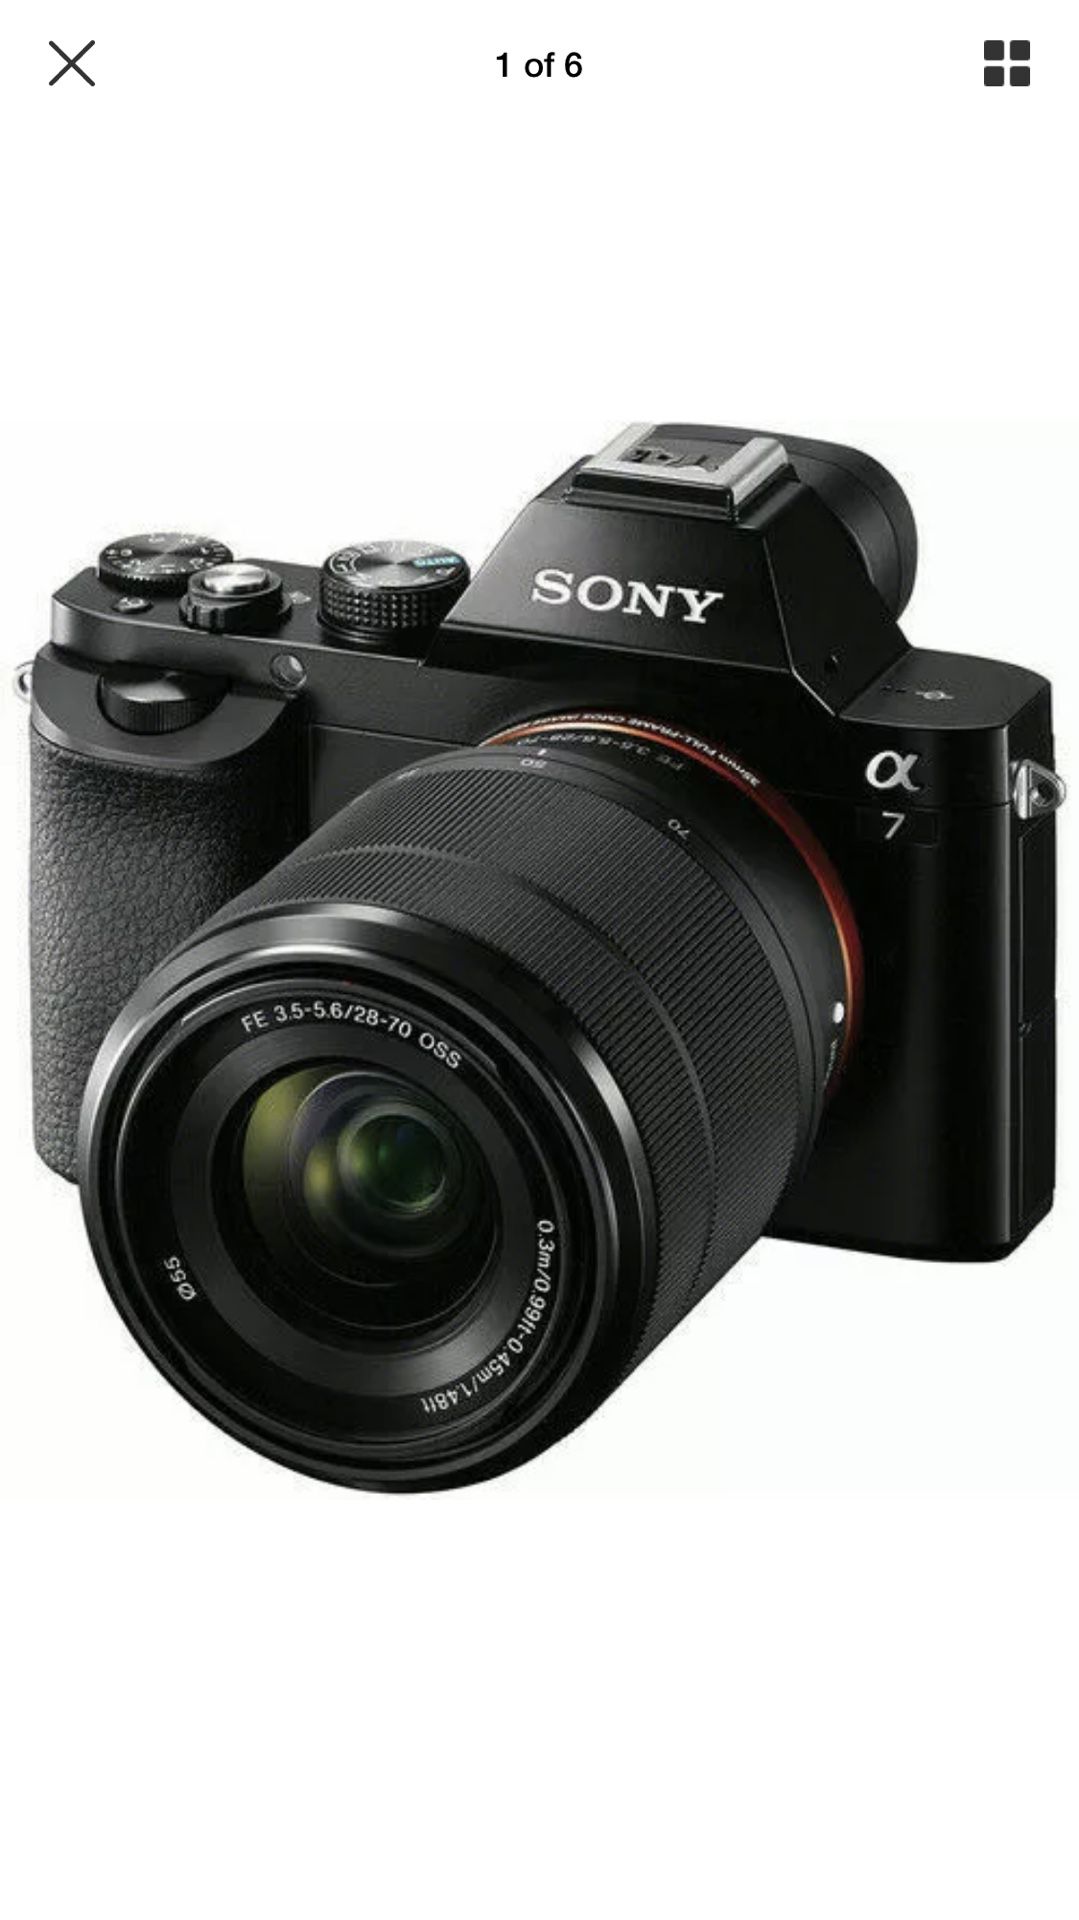 SONY A7 CAMERA WITH LENS